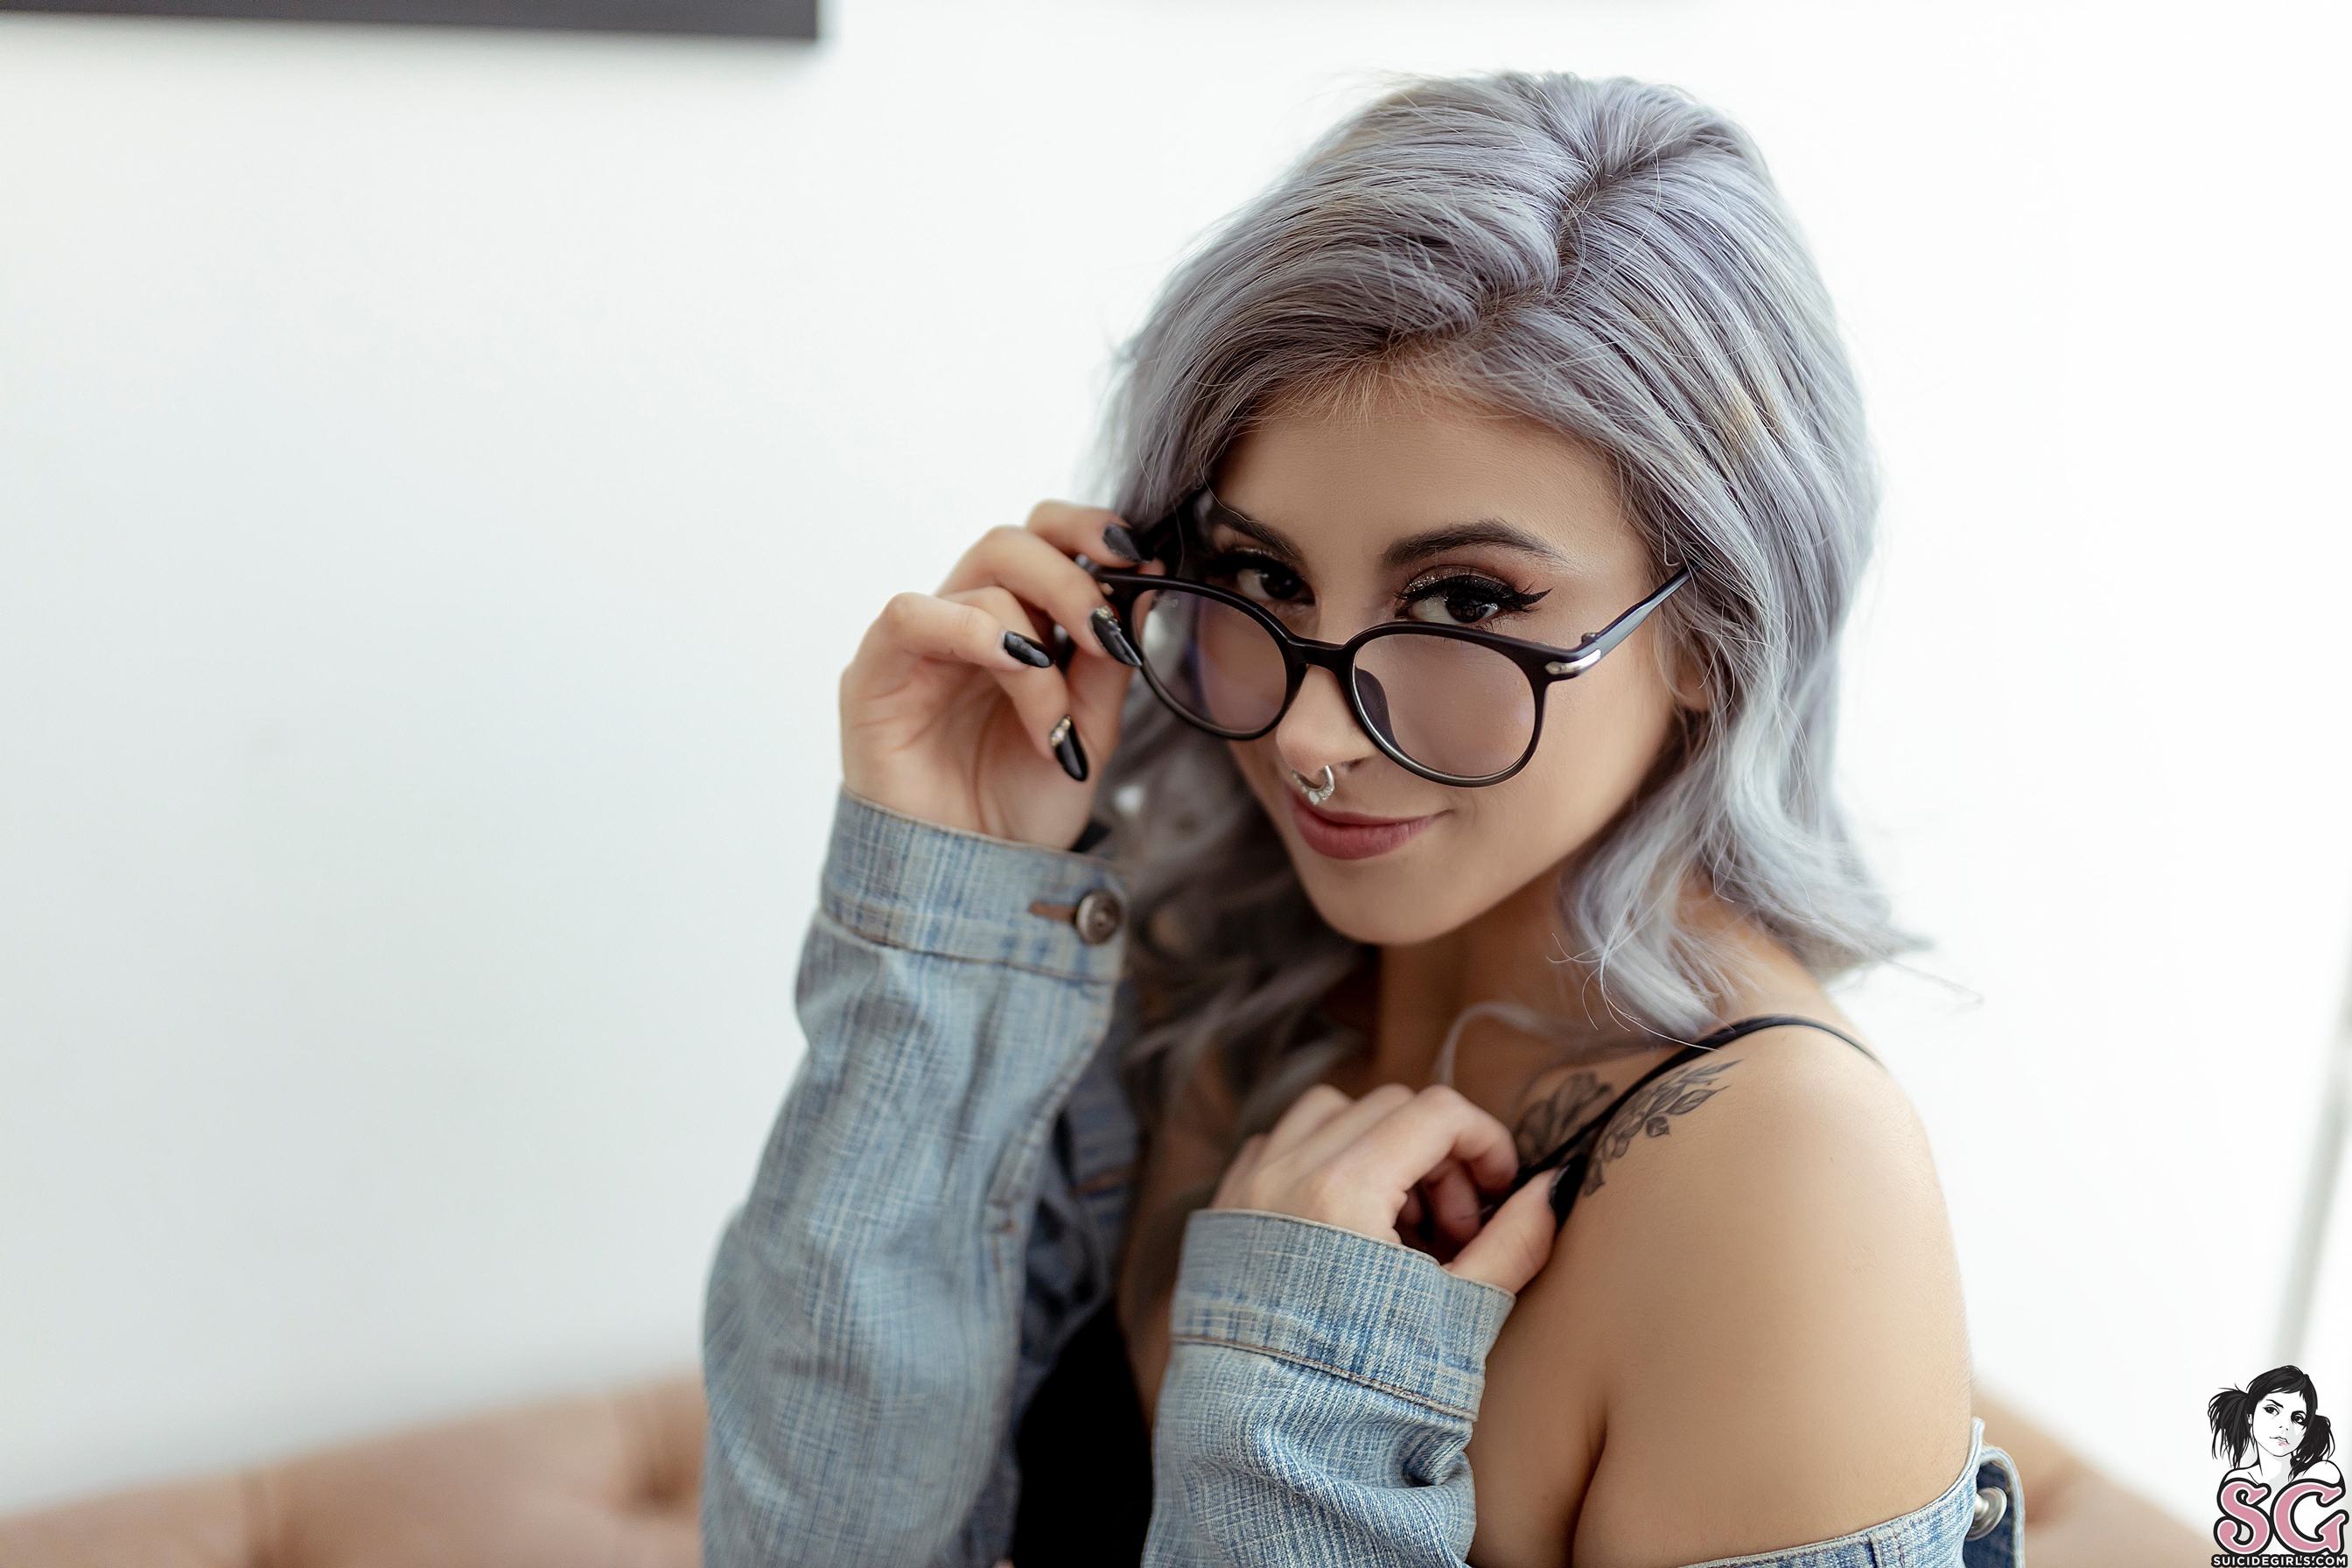 Gray Hair Dyed Hair Model Women Face Pierced Nose Bokeh Bare Shoulders Tattoo Women With Glasses Bla 2688x1792